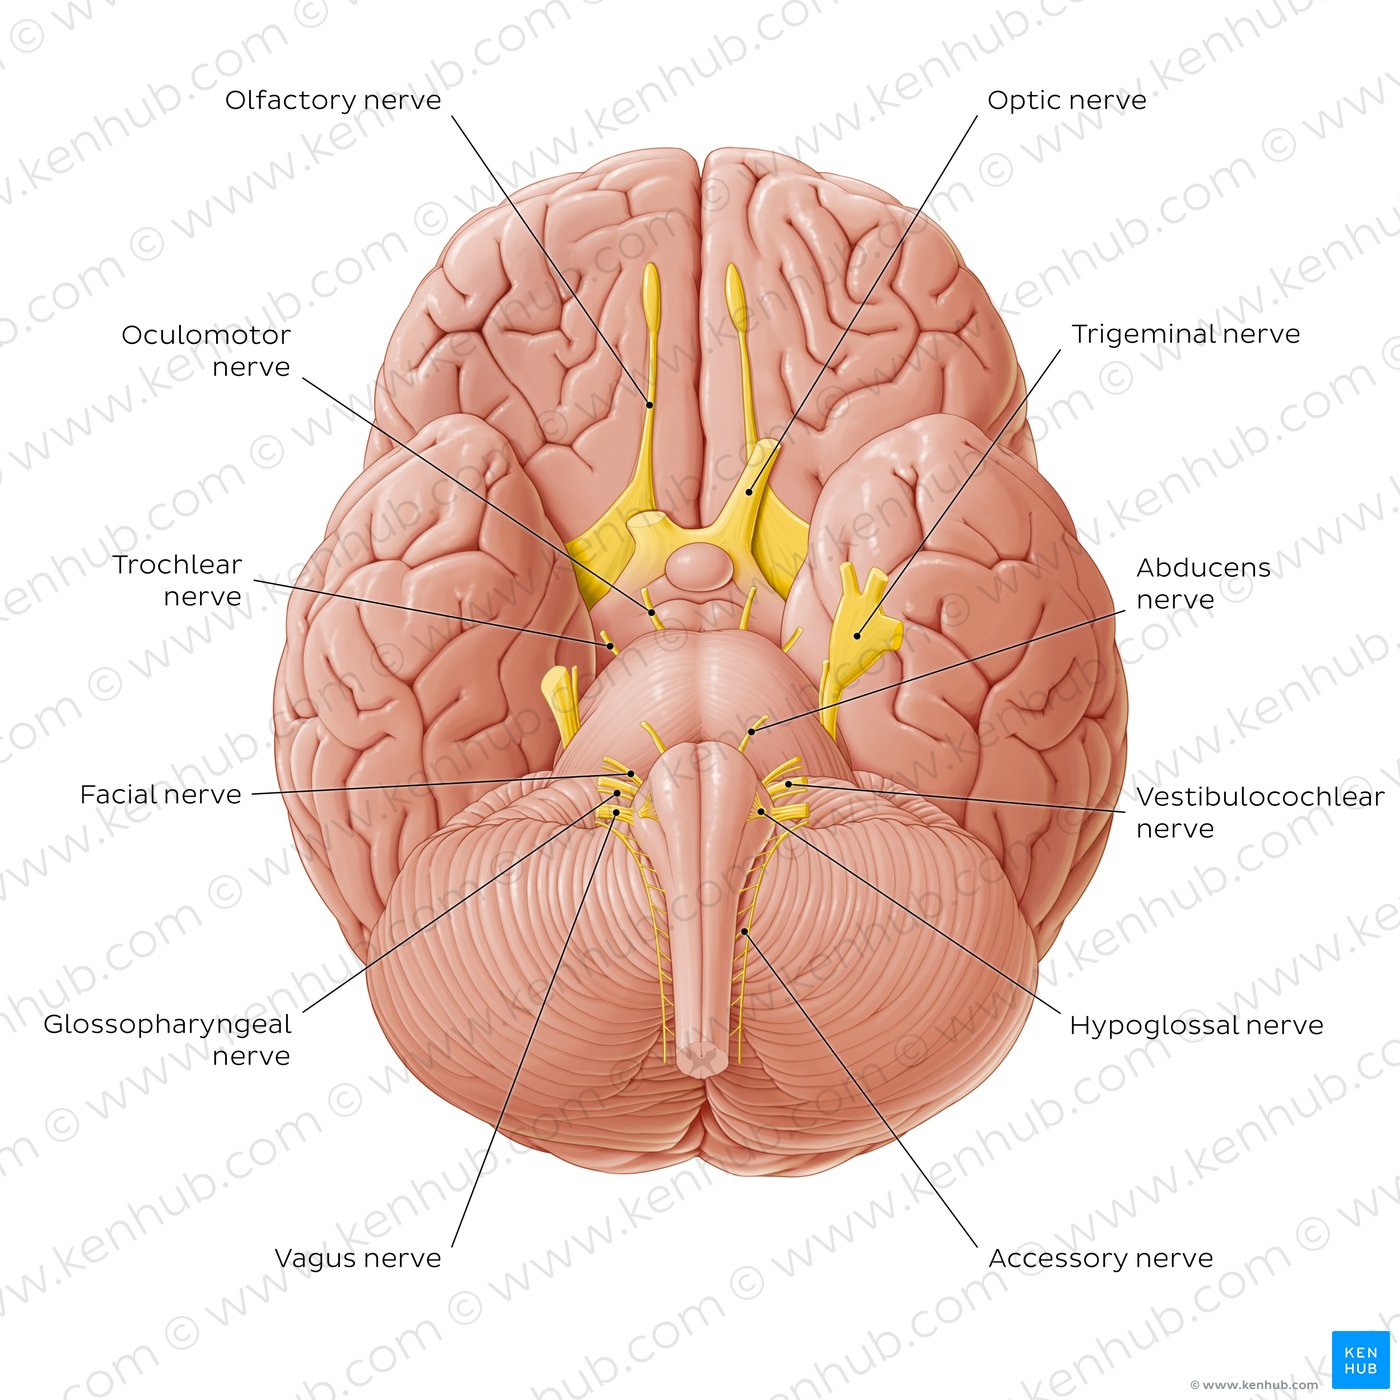 An overview image which shows all the 12 cranial nerves with labels